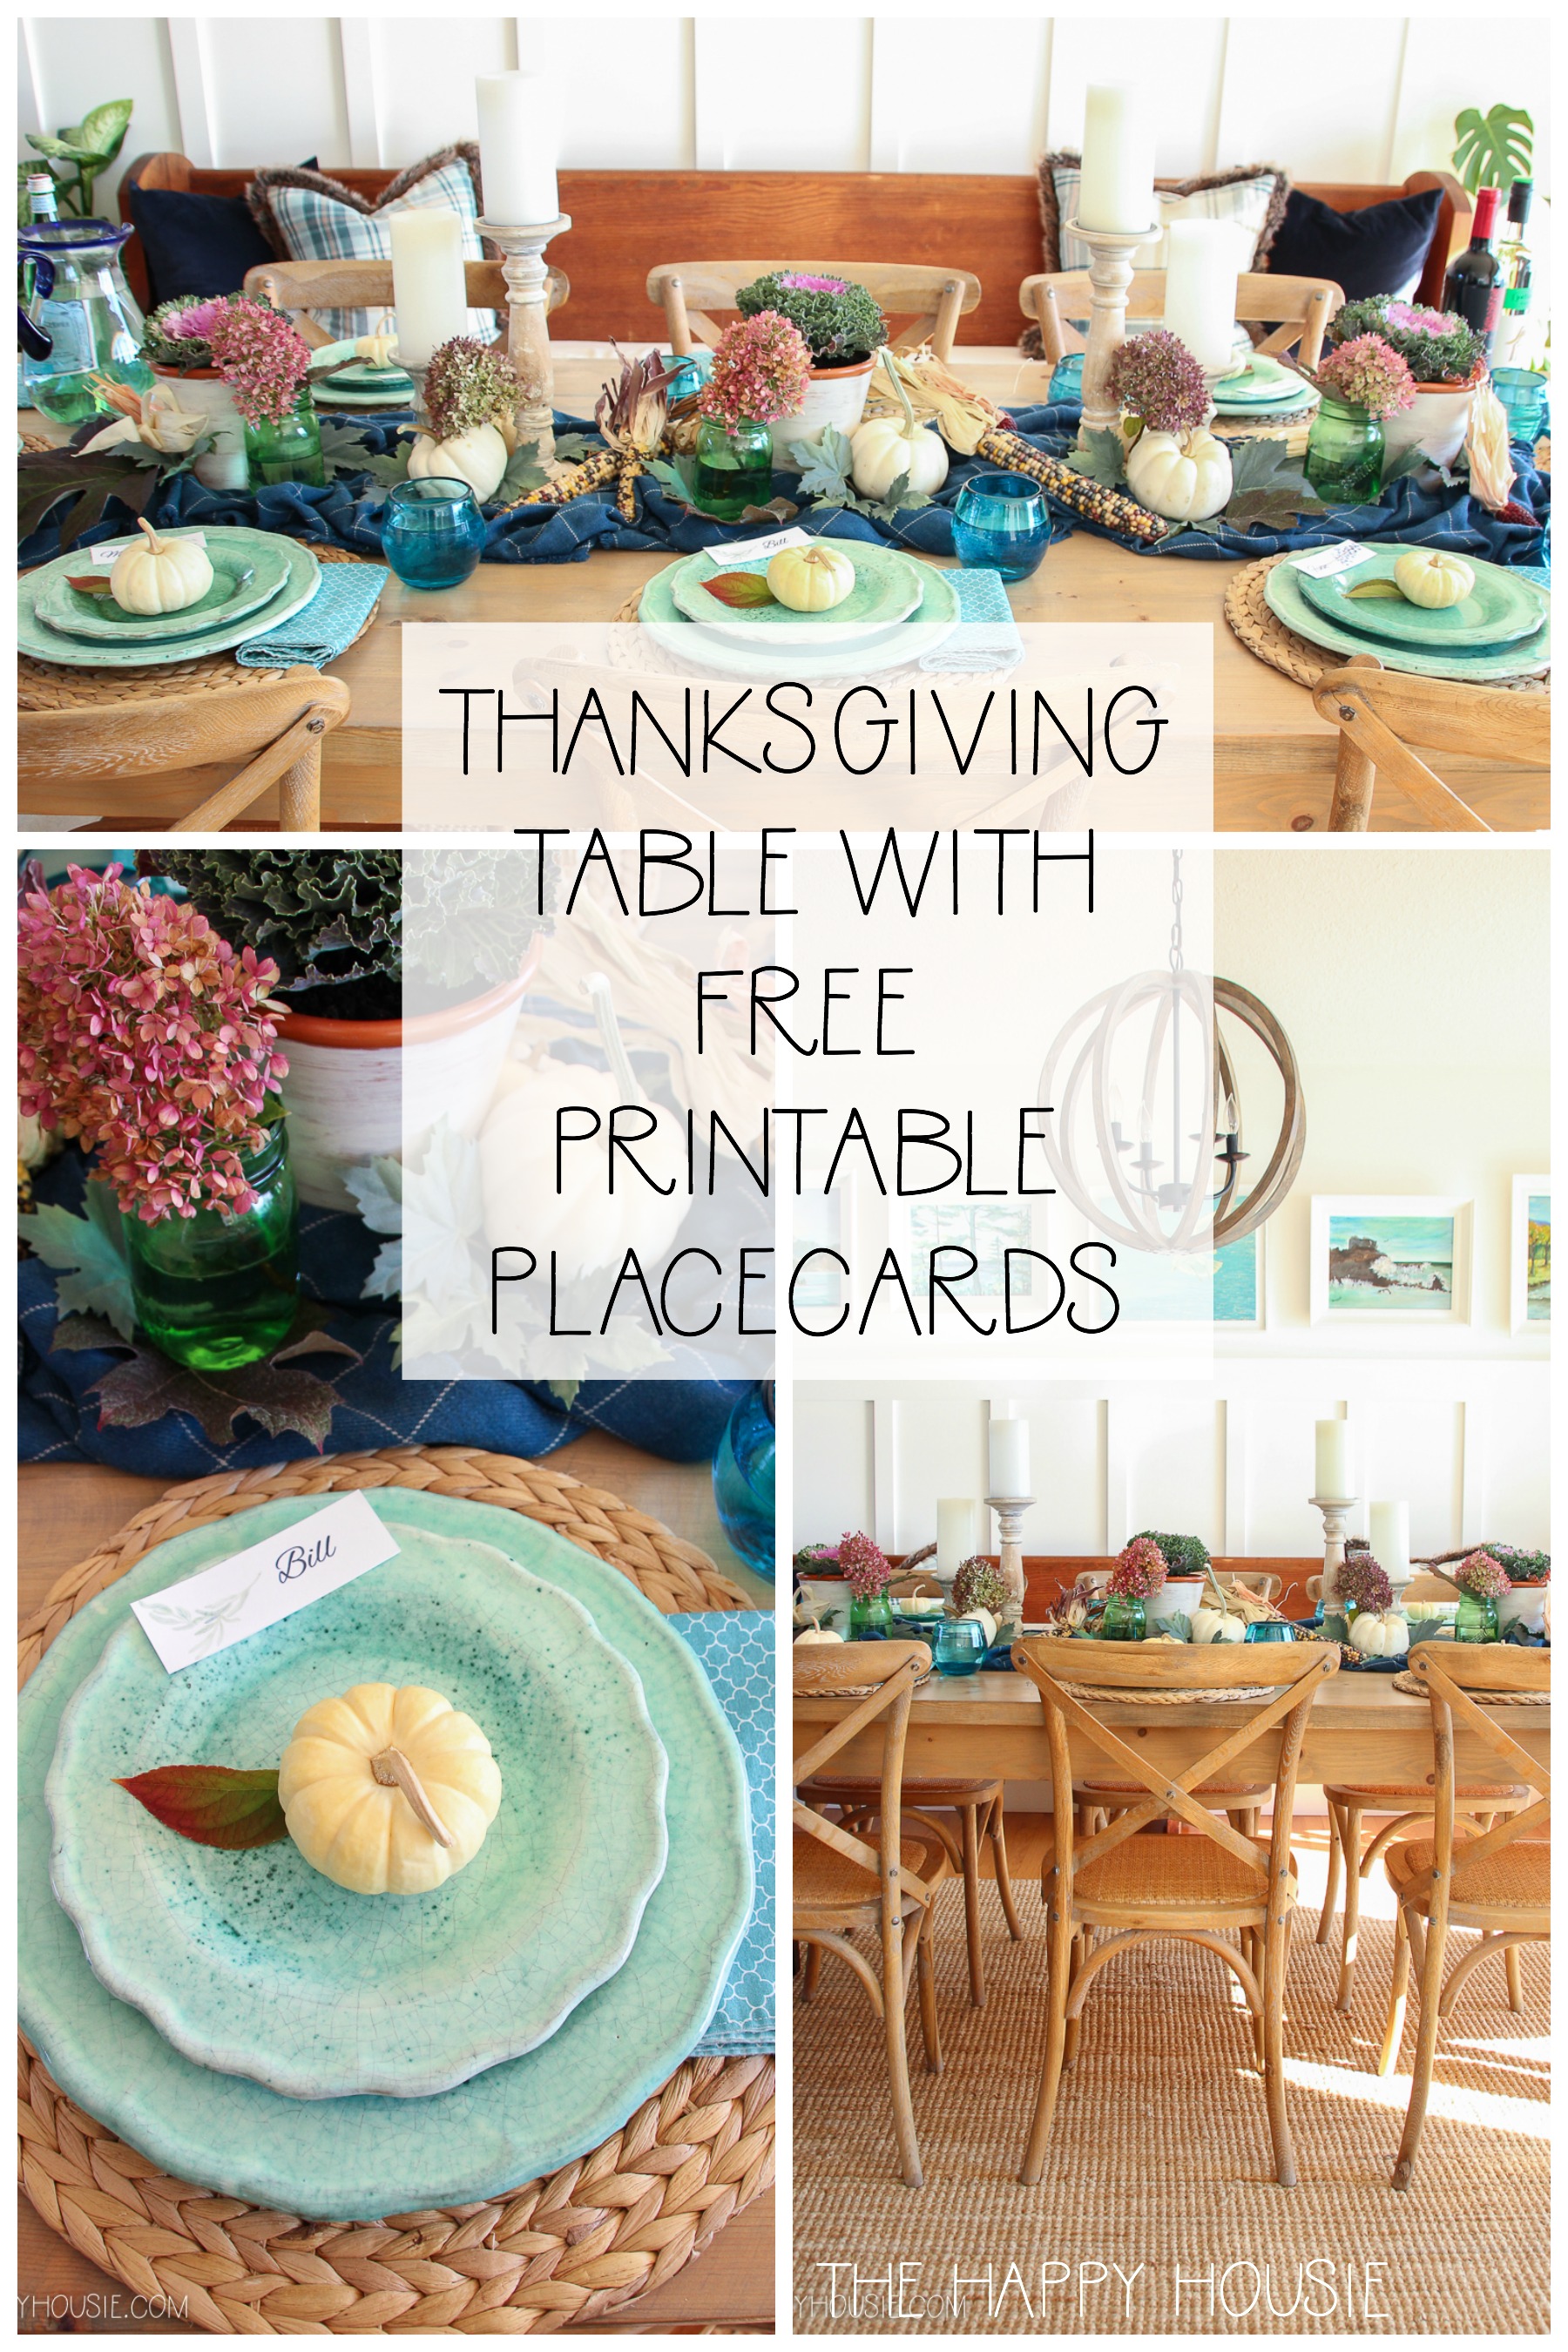 Thanksgiving table with free printable placecards poster.